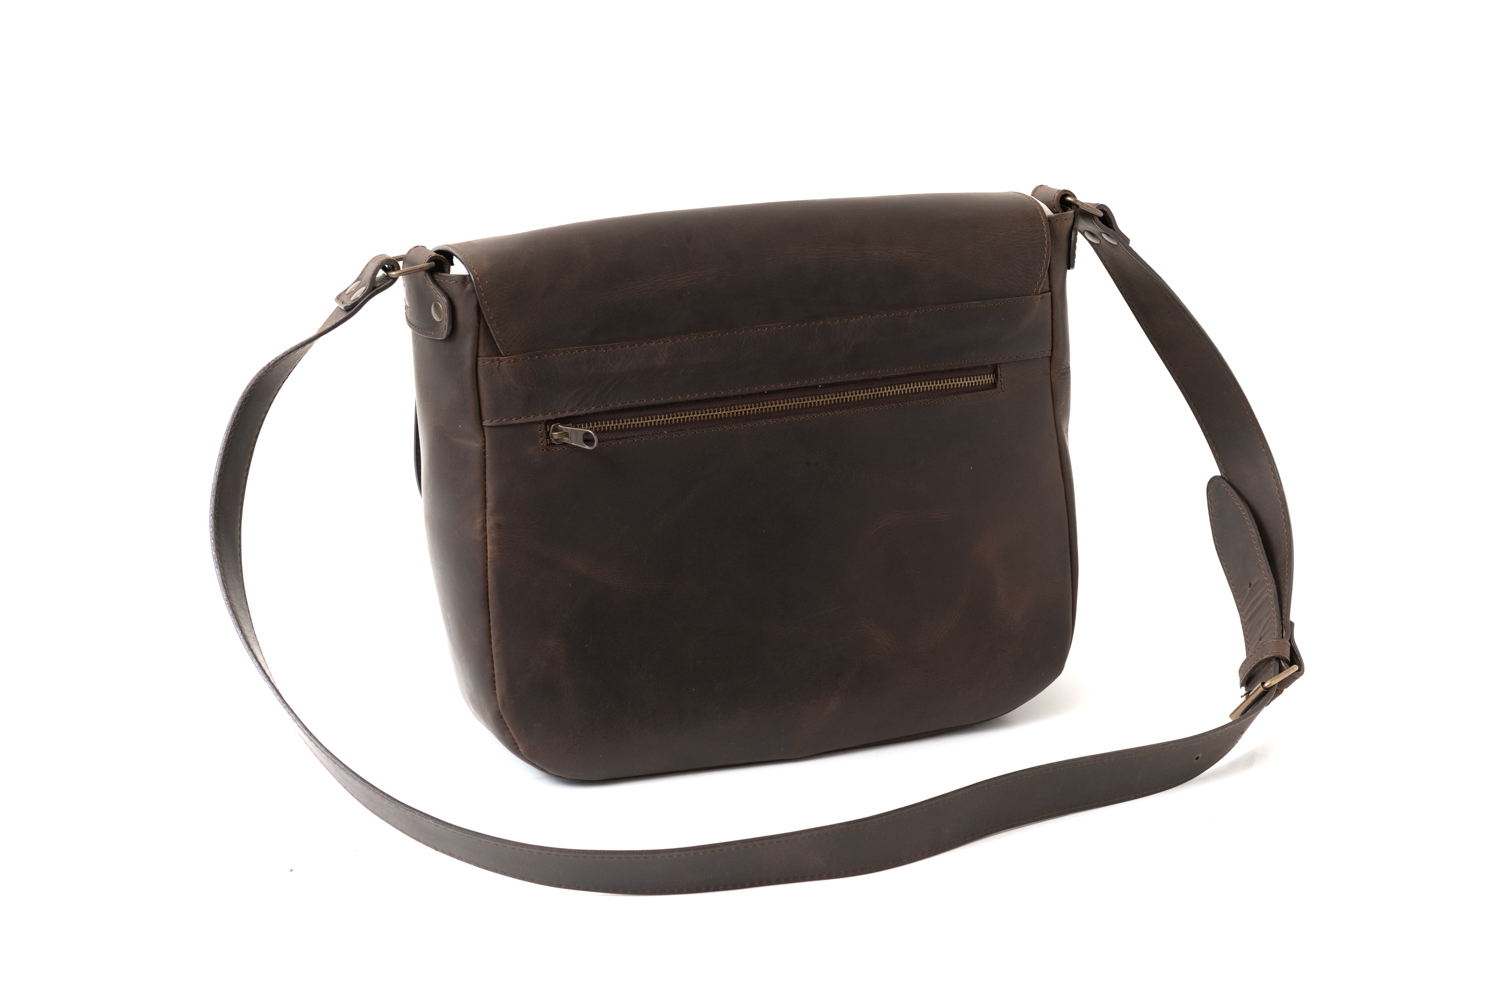 Laptop bag with a roomy compartment in genuine leather